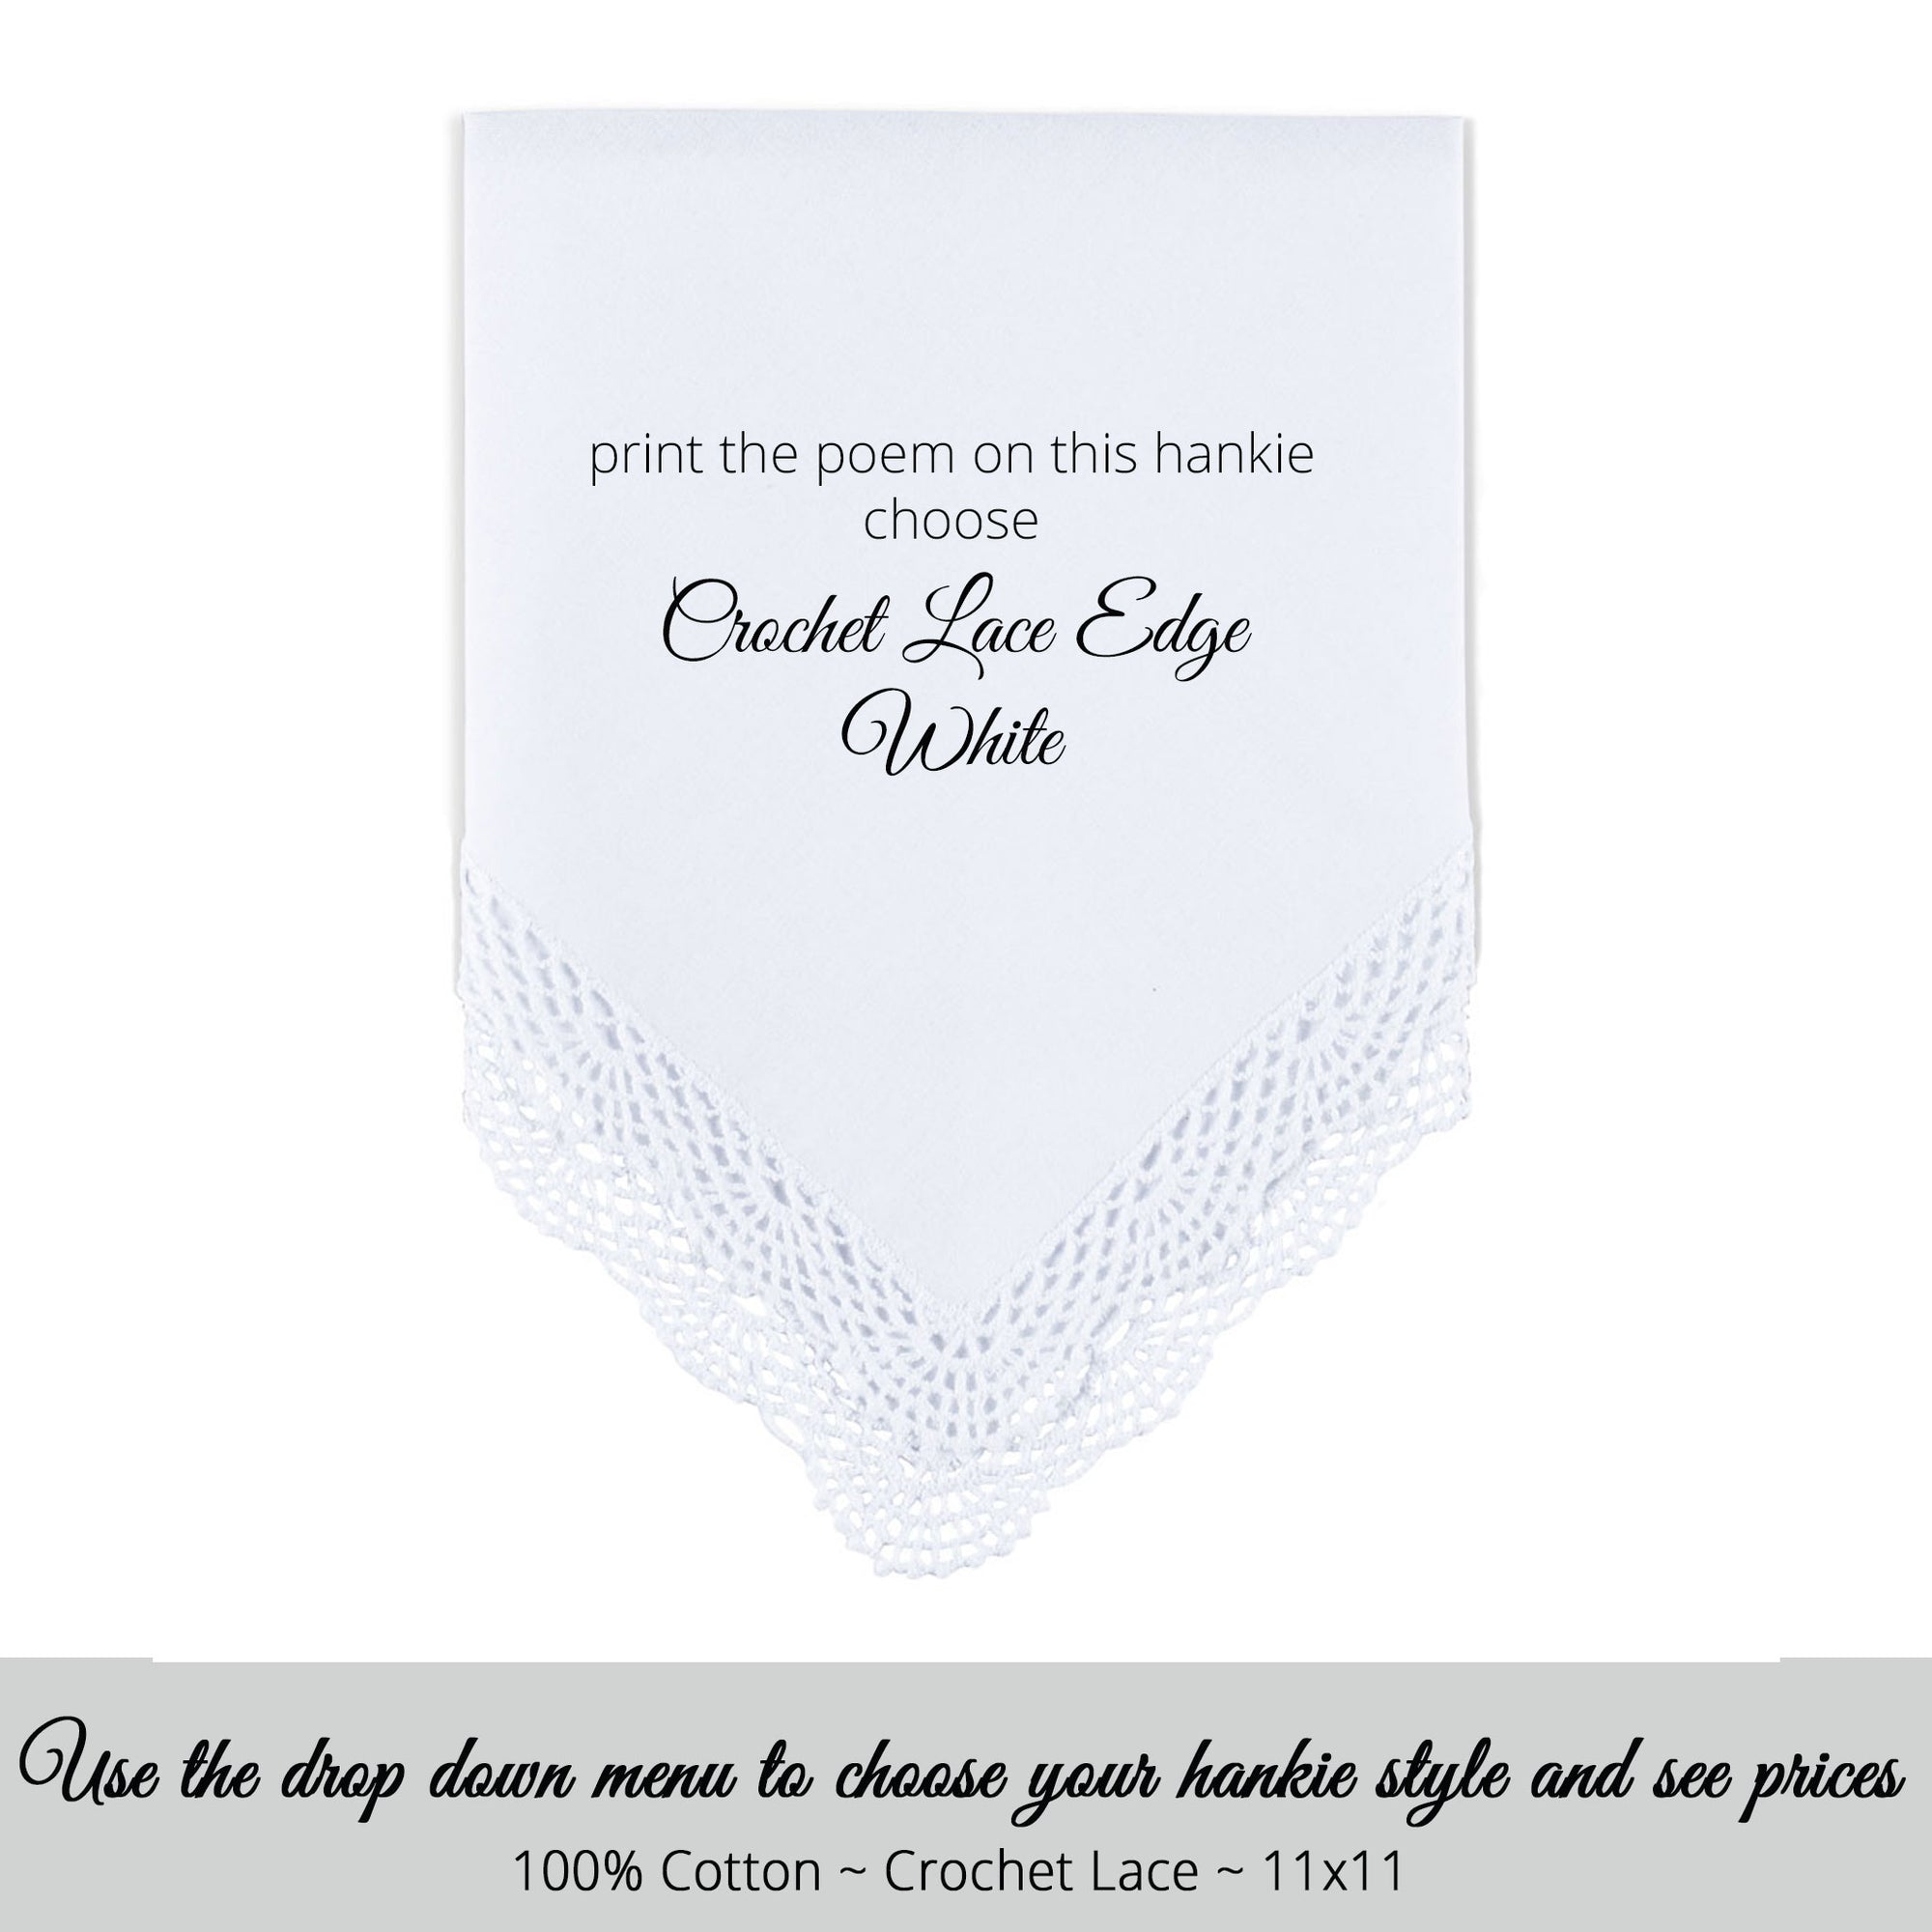 Wedding handkerchief white with crochet lace edge poem printed hankie for the sister of the bride matron of honor